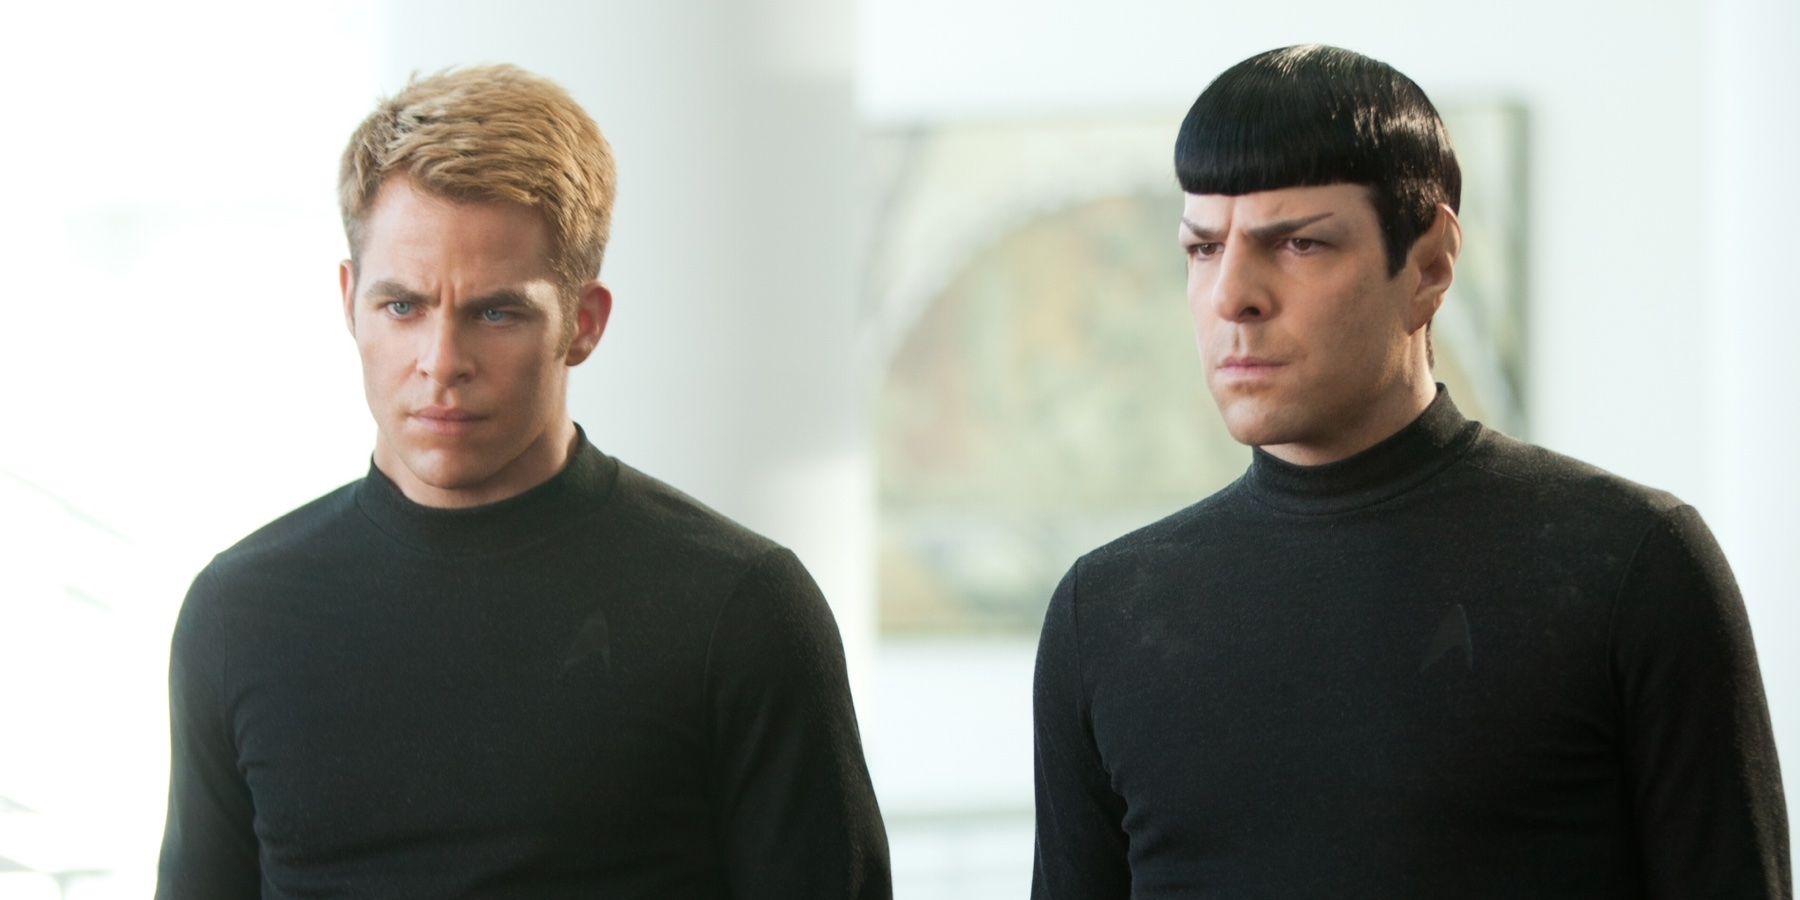 Mission: Impossible – Fallout Director Would Direct A Star Trek Movie